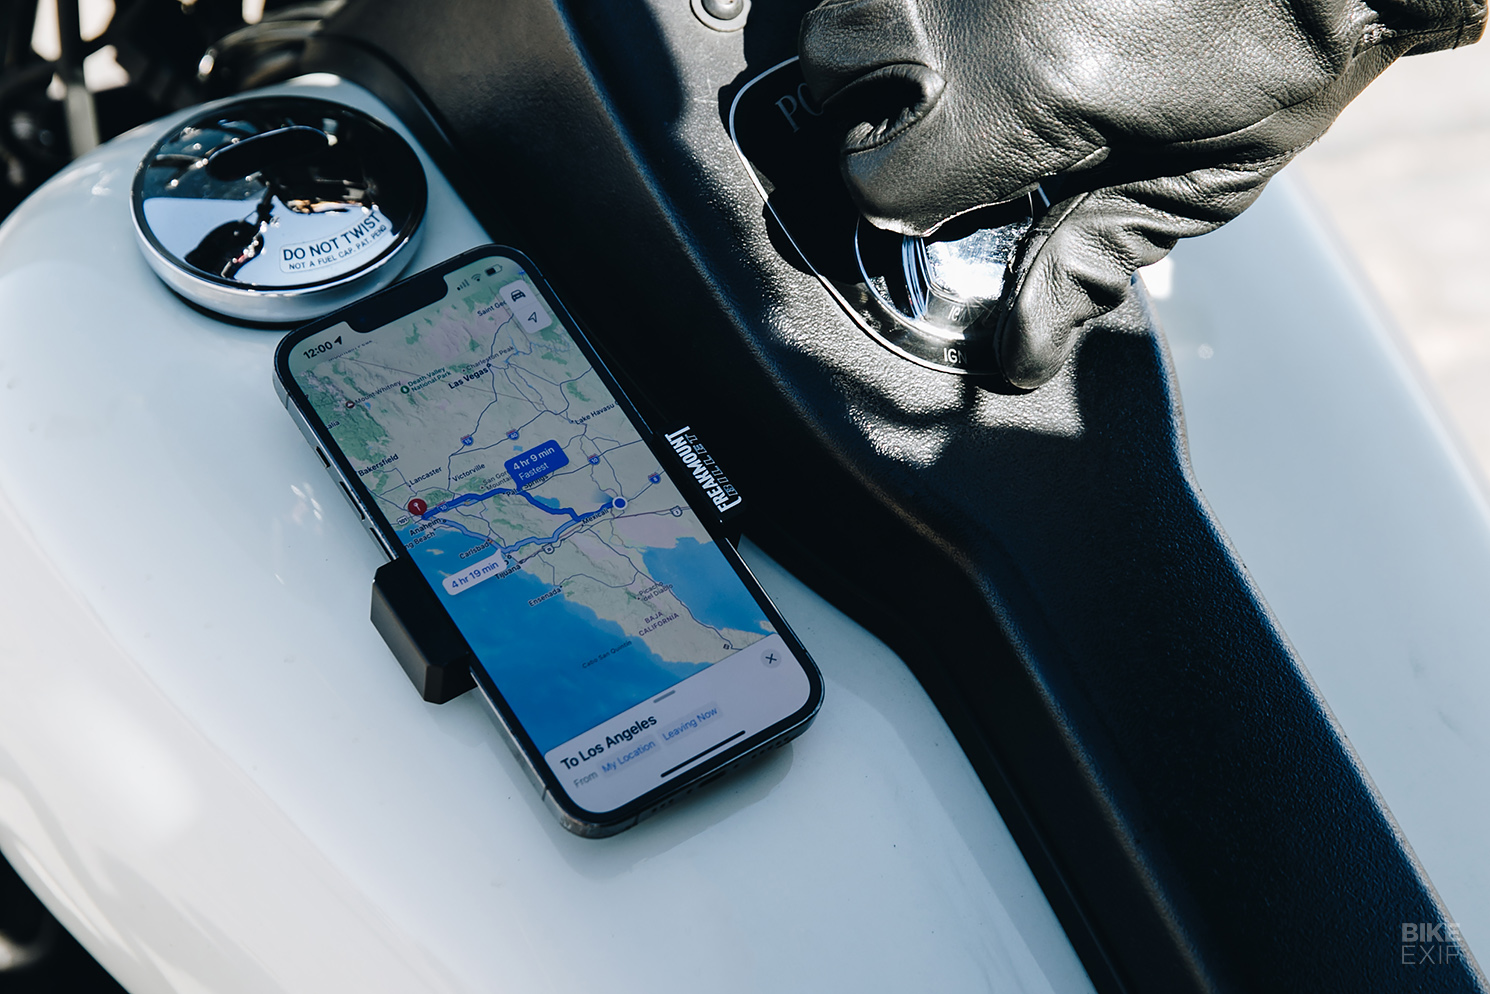 THE BEST Motorcycle Cell Phone Mount. PERIOD! 